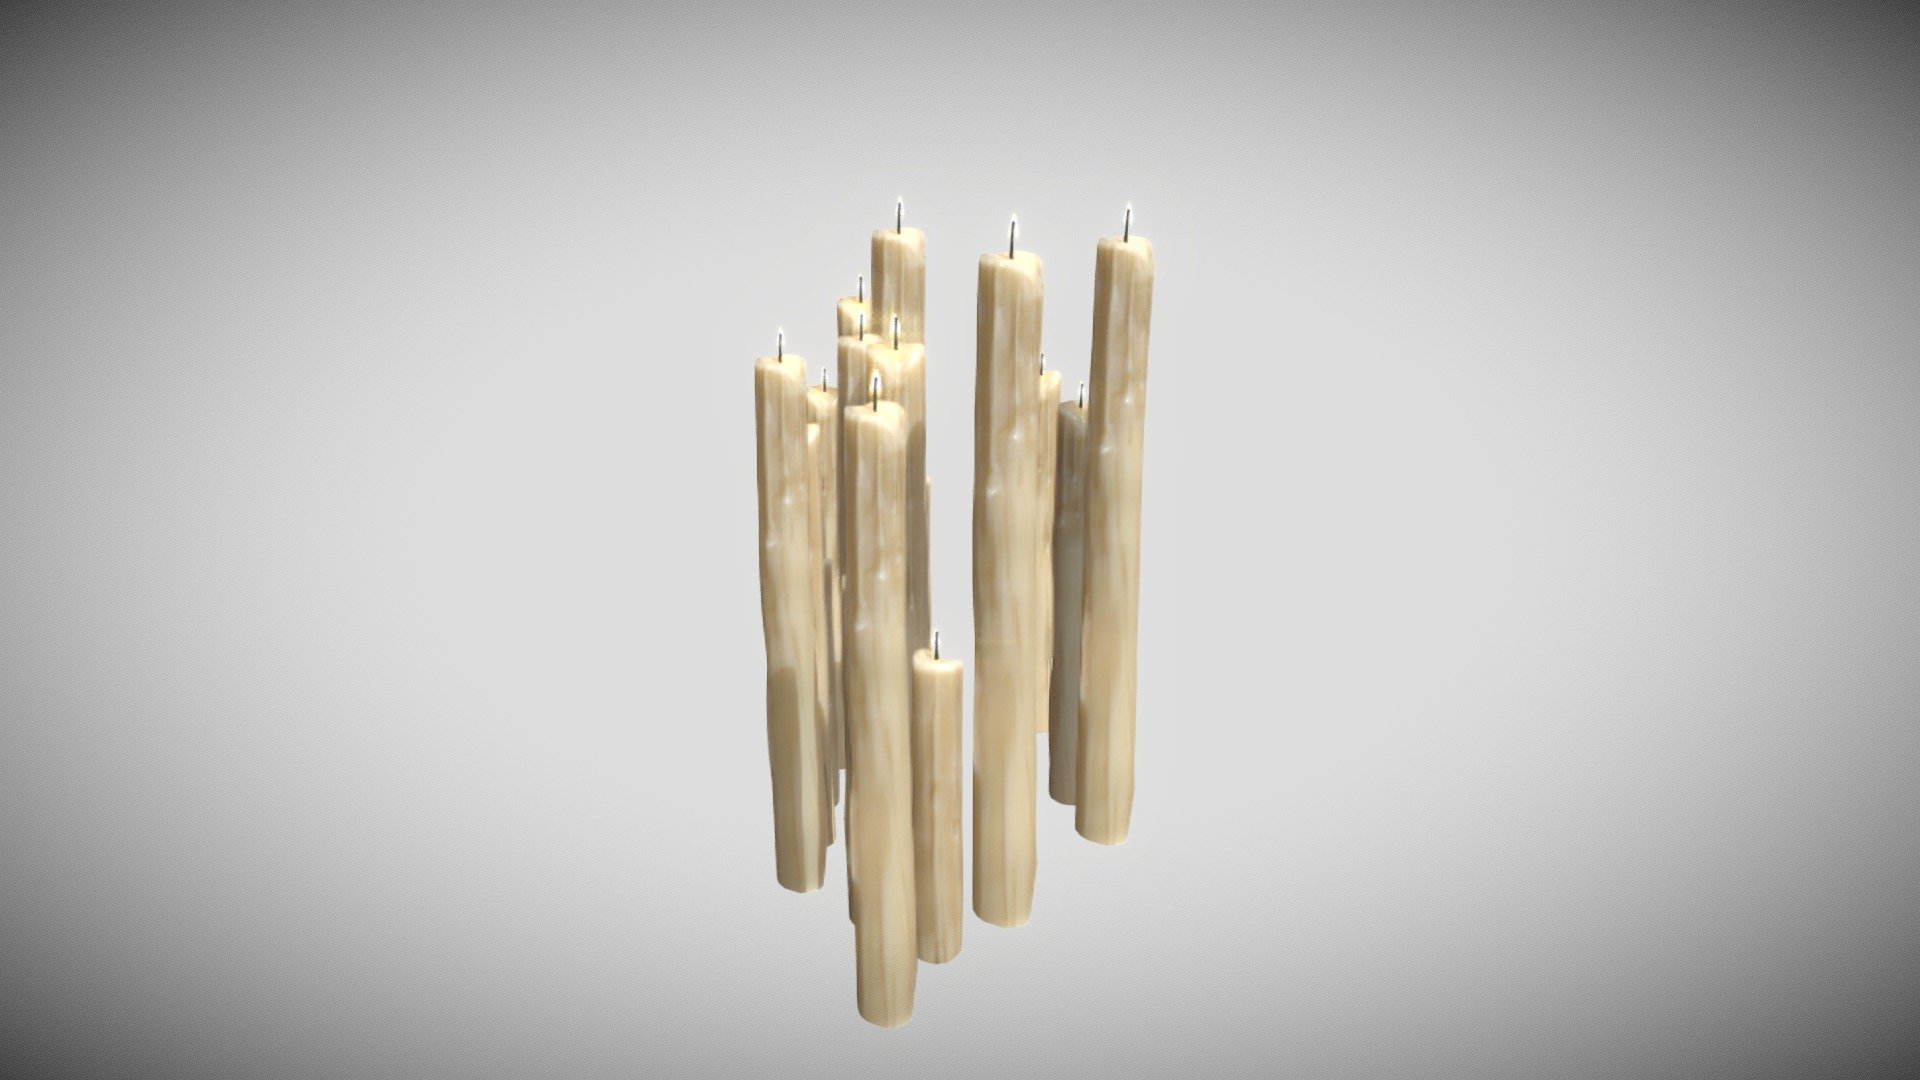 Thin Melted Candles 3D Model. This model contains the Thin Melted Candles itself 

All modeled in Maya, textured with Substance Painter.

The model was built to scale and is UV unwrapped properly. Contains only one 4K texture set.  

Besides the regular maps, this set contains: opacity, emissive, SSS.

⦁   4080 tris. 

⦁   Contains: .FBX .OBJ and .DAE

⦁   Model has clean topology. No Ngons.

⦁   Built to scale

⦁   Unwrapped UV Map

⦁   4K Texture set

⦁   High quality details

⦁   Based on real life references

⦁   Renders done in Marmoset Toolbag

Polycount: 

Verts 2109

Edges 4146

Faces 2046

Tris 4080

If you have any questions please feel free to ask me 3d model